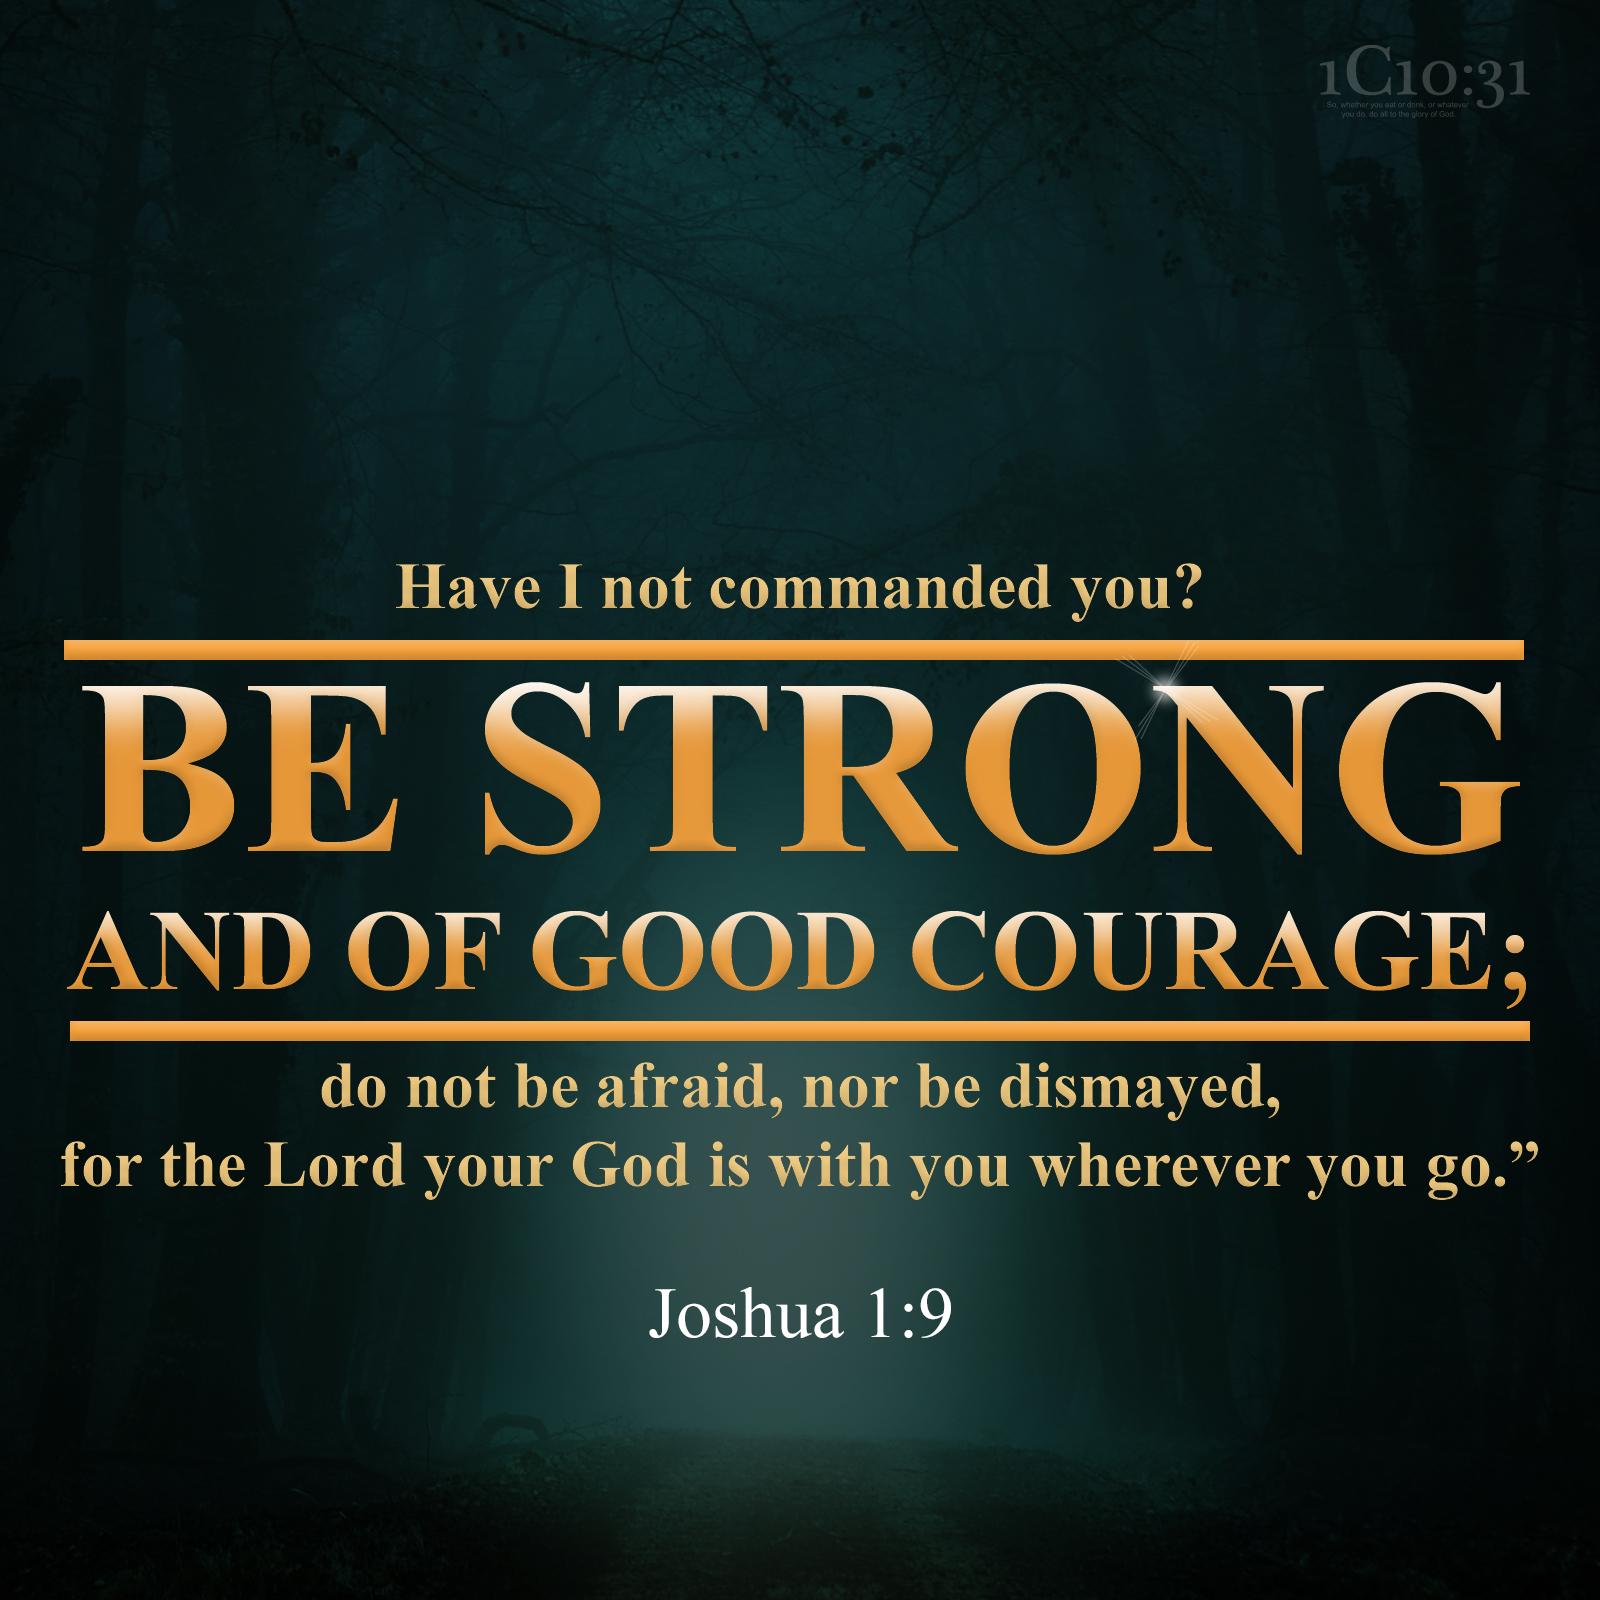 Joshua 1:9 Have I not commanded you? Be strong and of good courage; do not be afraid, nor be dismayed, for the Lord your God is with you wherever you go.”